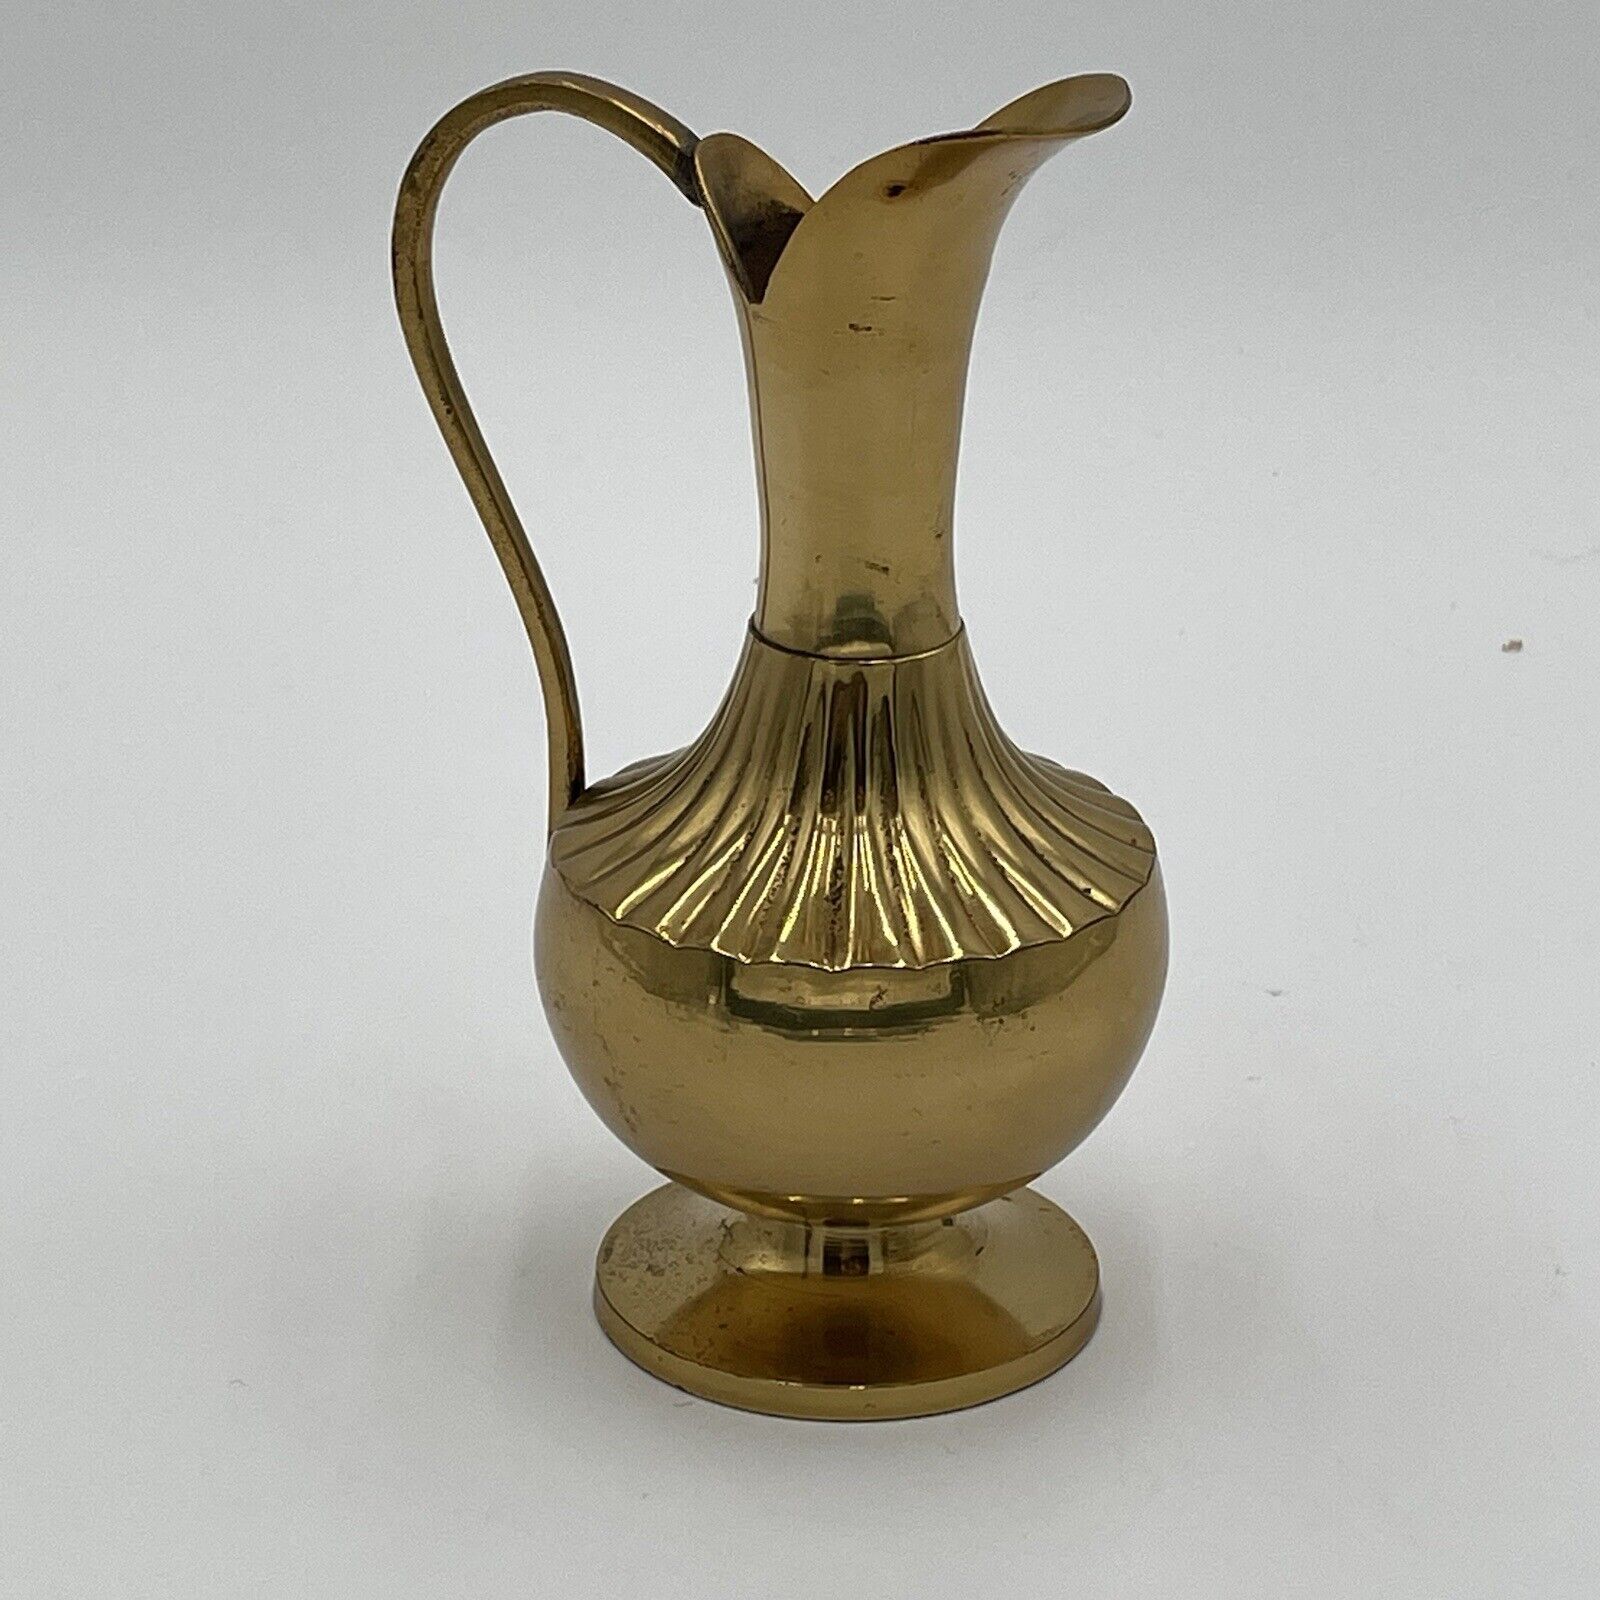 Vintage Brass Pitcher India Ornate Moroccan Gold Decor 